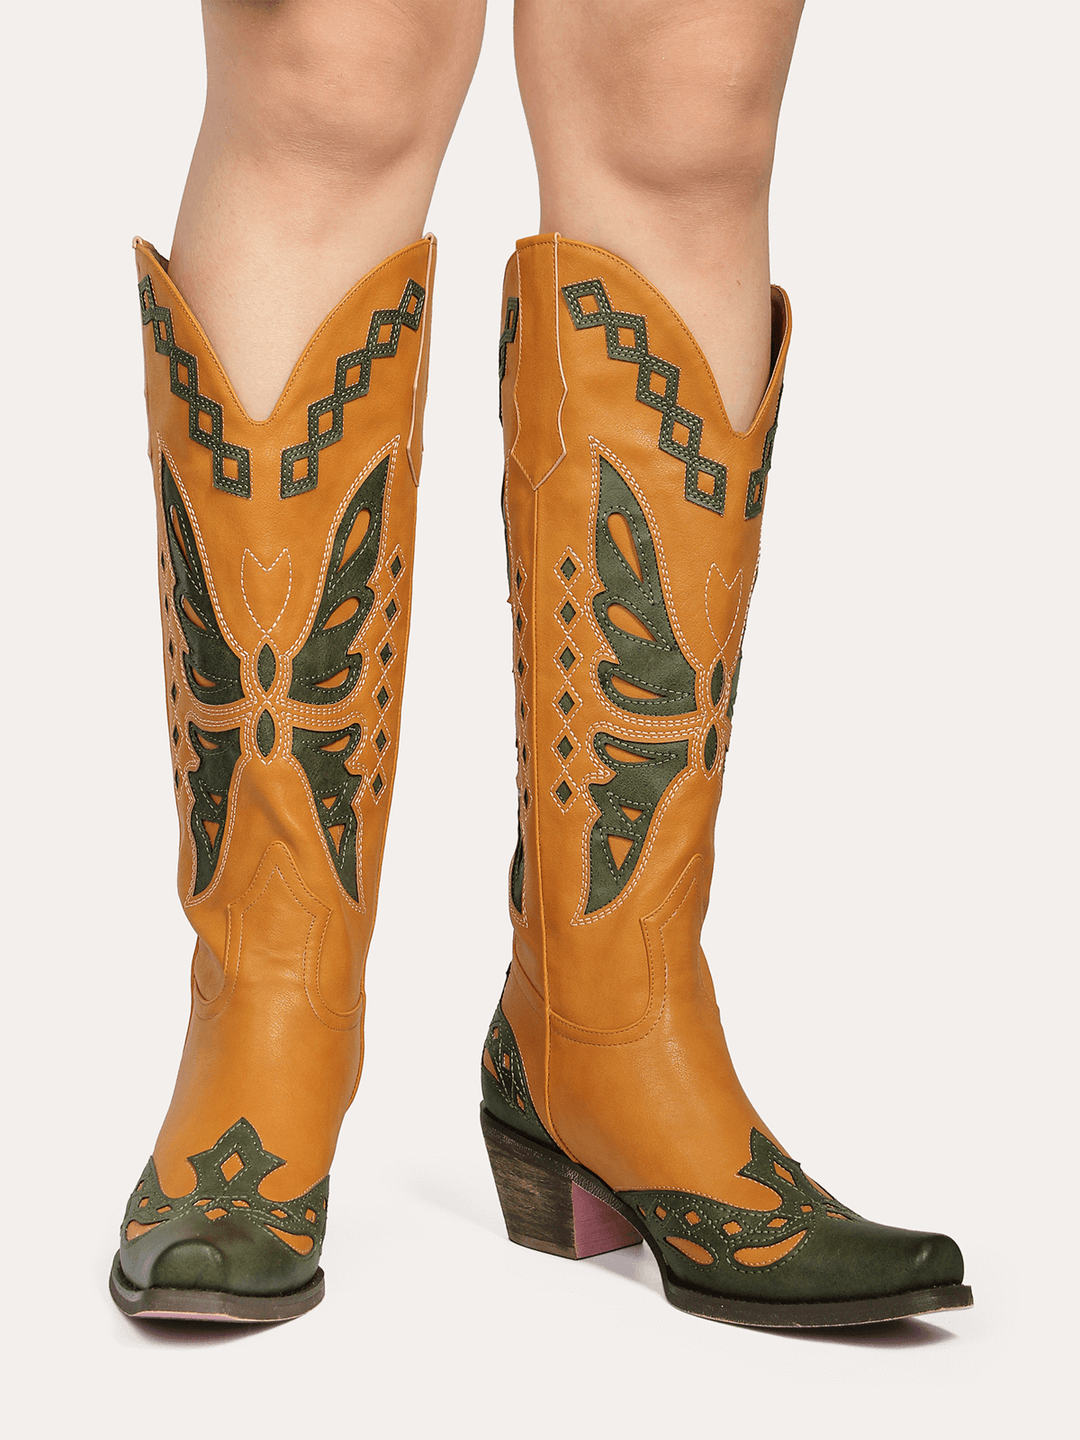 The Candice Boots